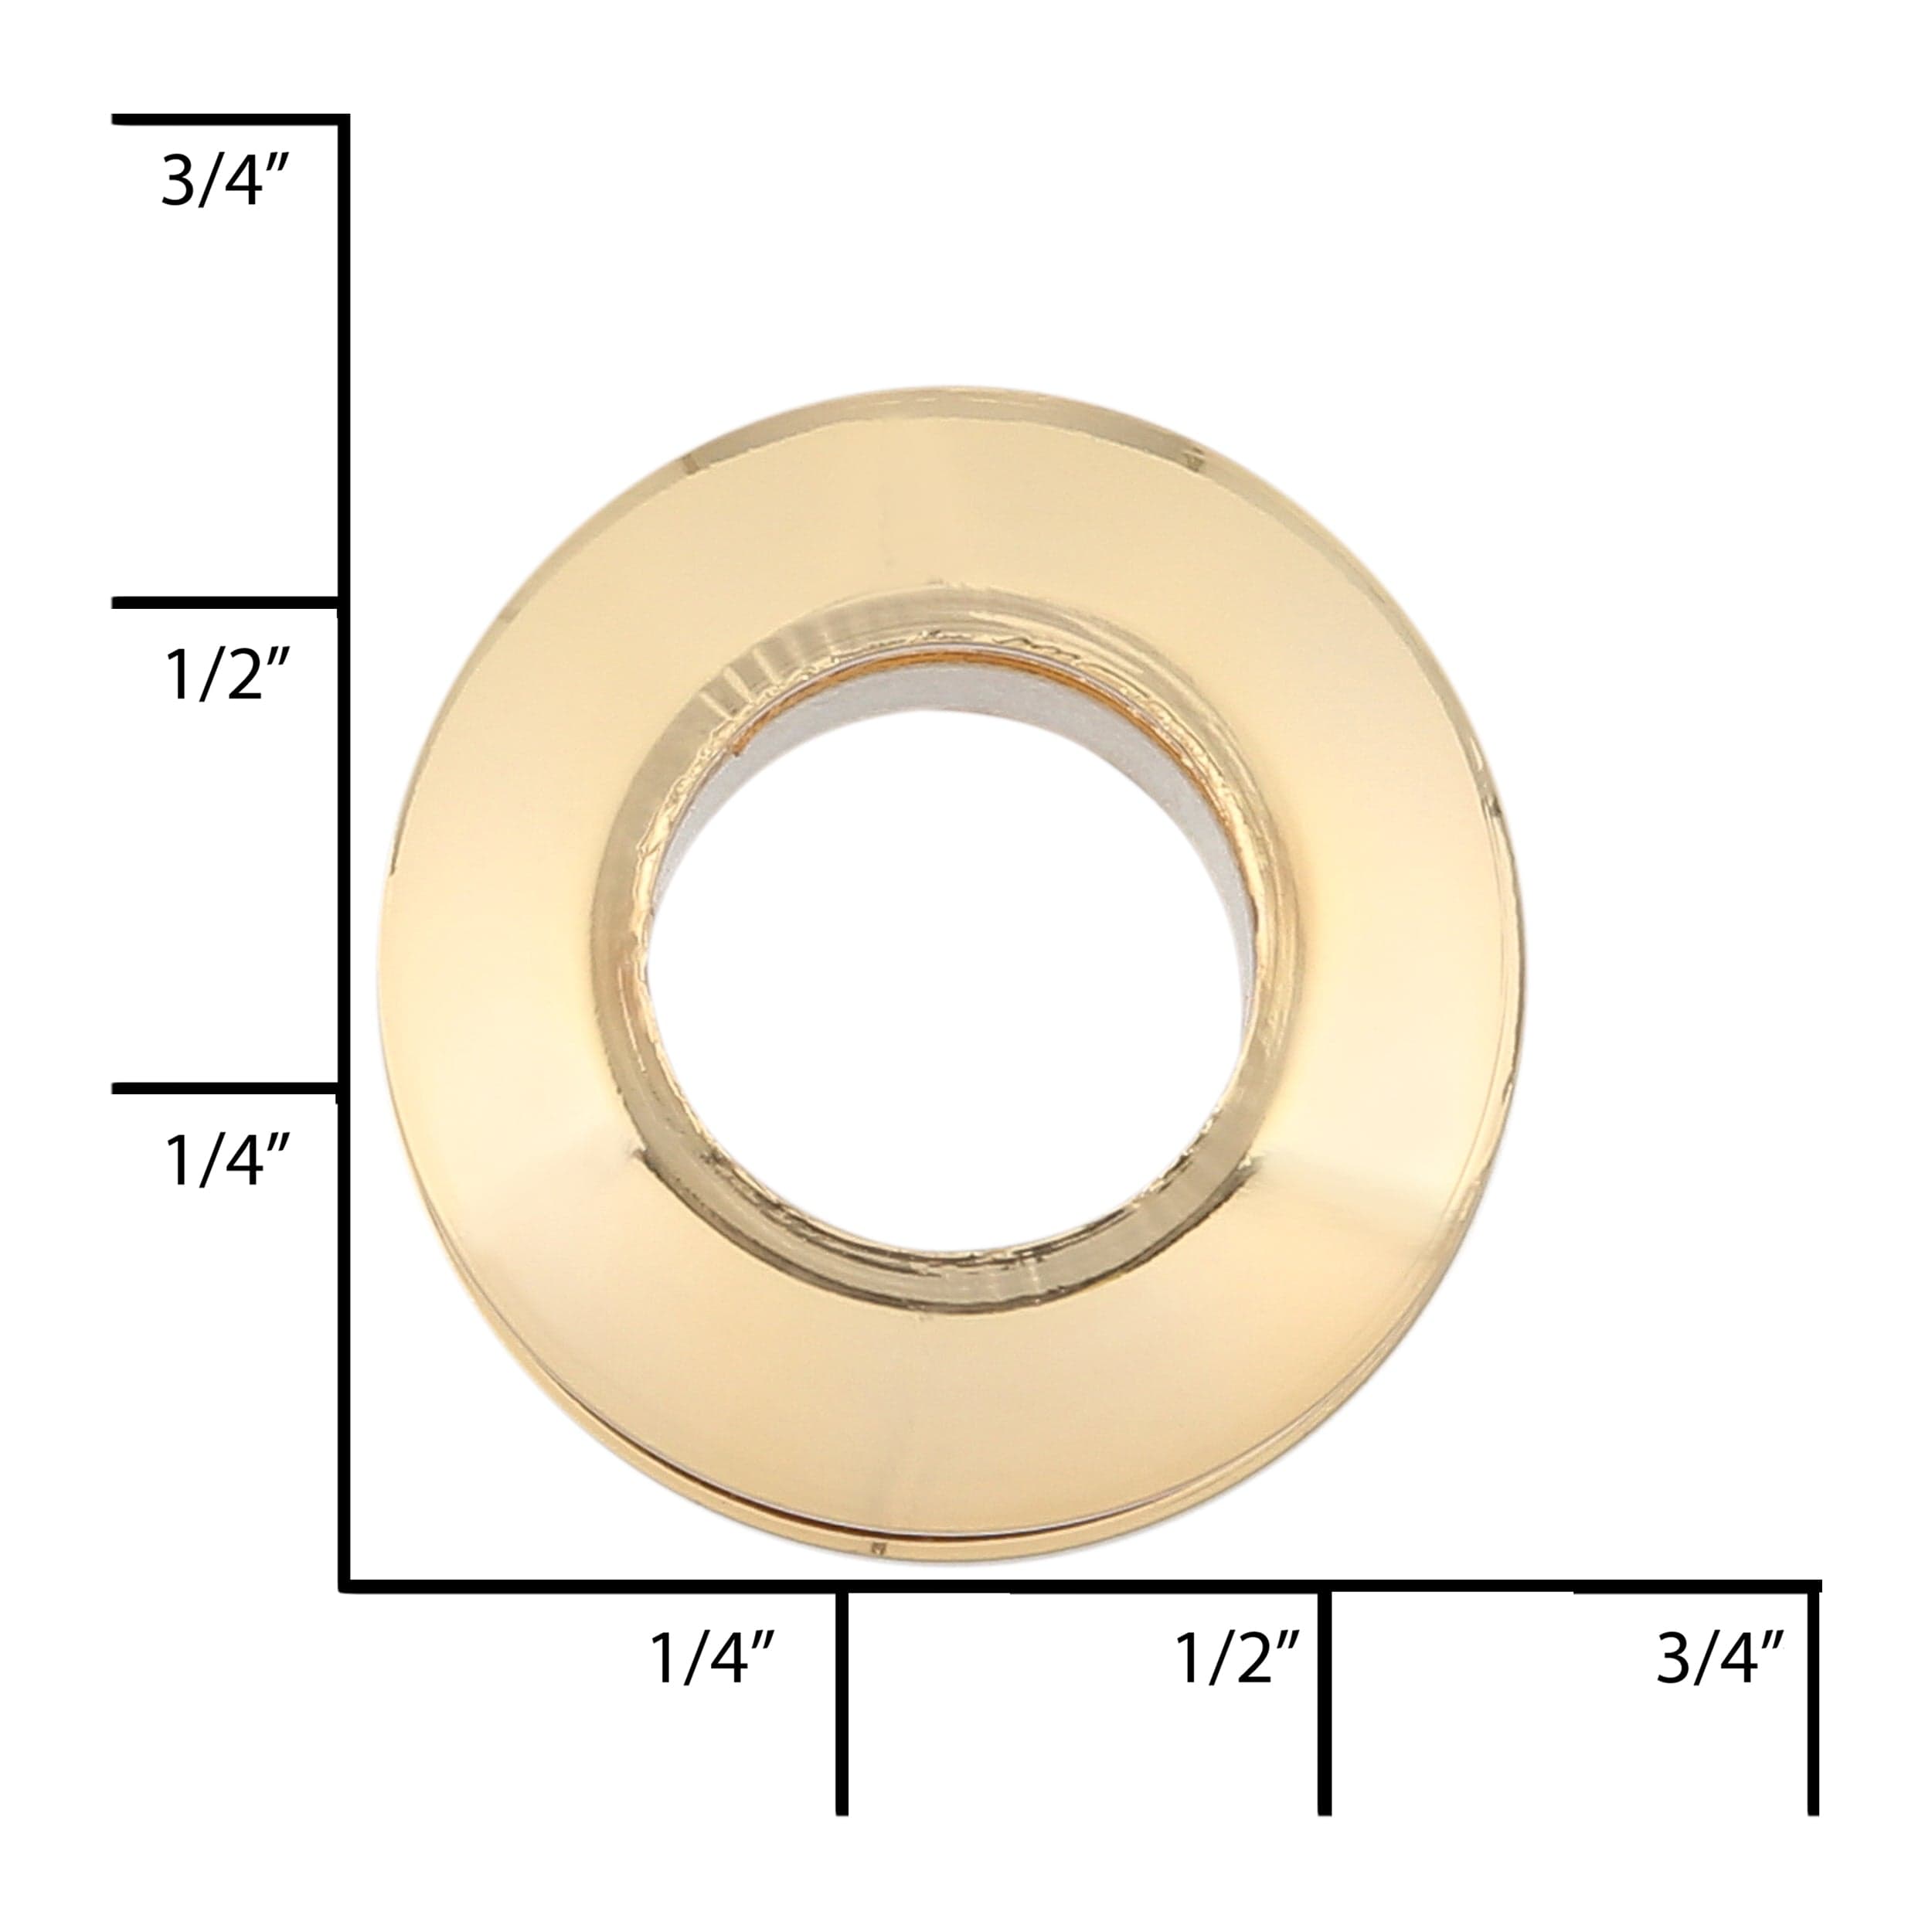 Ohio Travel Bag Fasteners 5/16" Gold, Screw Together Eyelet, Solid Brass, #P-1386-GOLD P-1386-GOLD